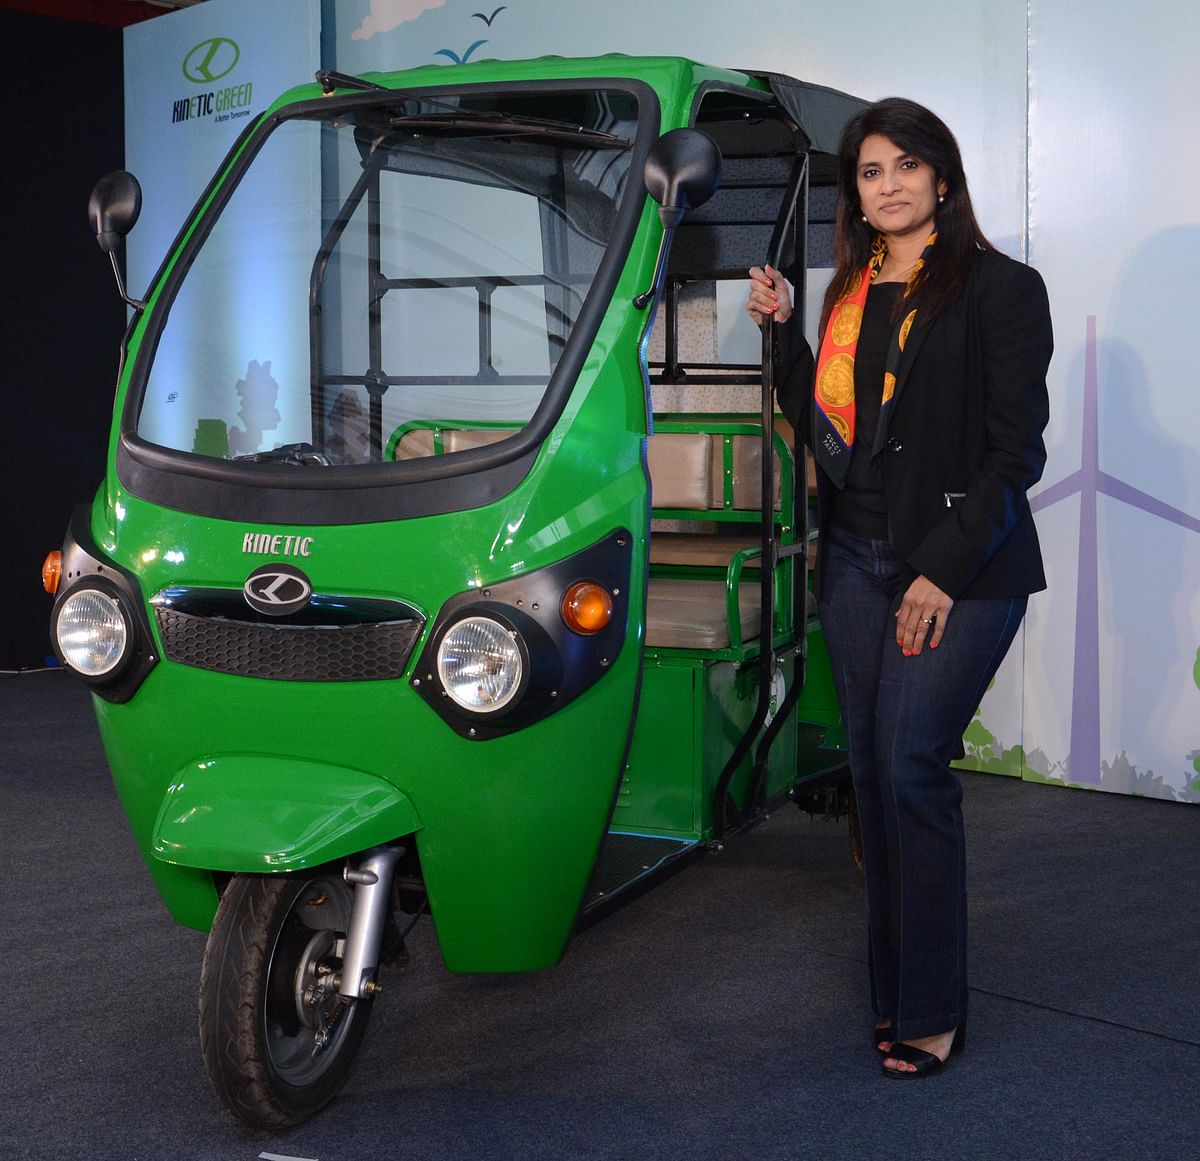 Kinetic’s electric three-wheeler comes at a time when pollution is a mounting concern.